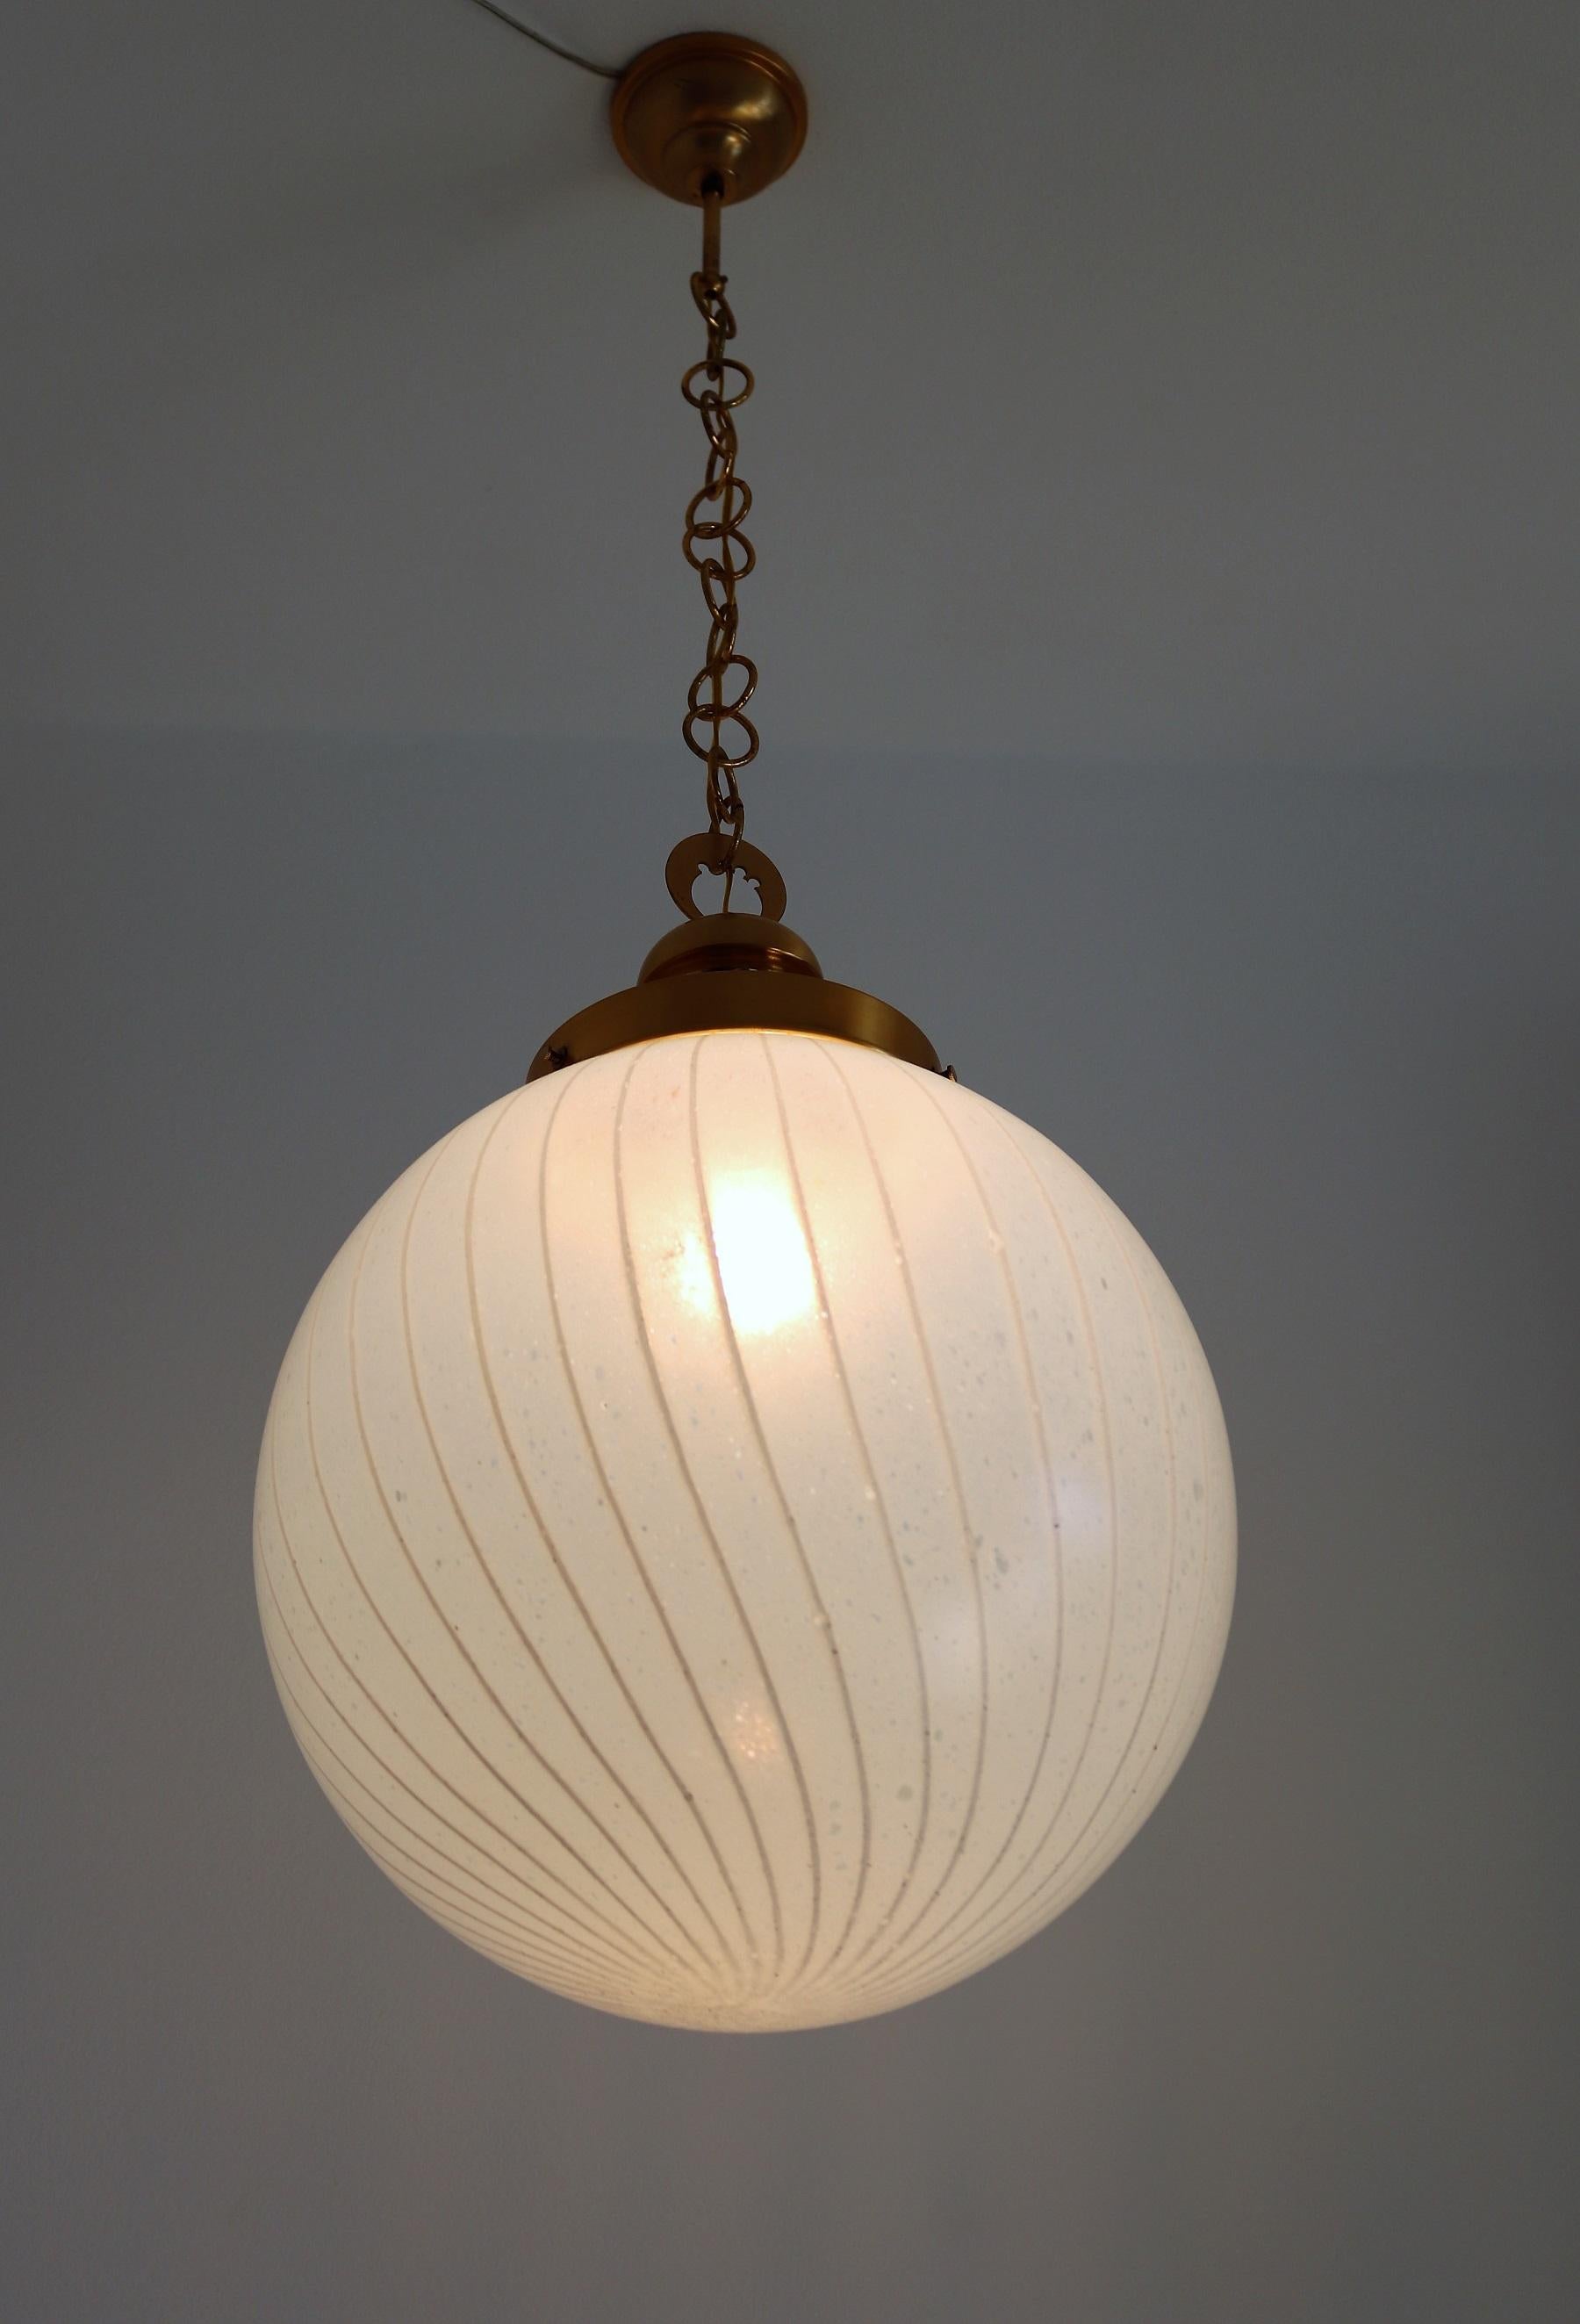 Italian Midcentury Murano Glass Globe Pendant Chandelier with Brass Details, 60s For Sale 4